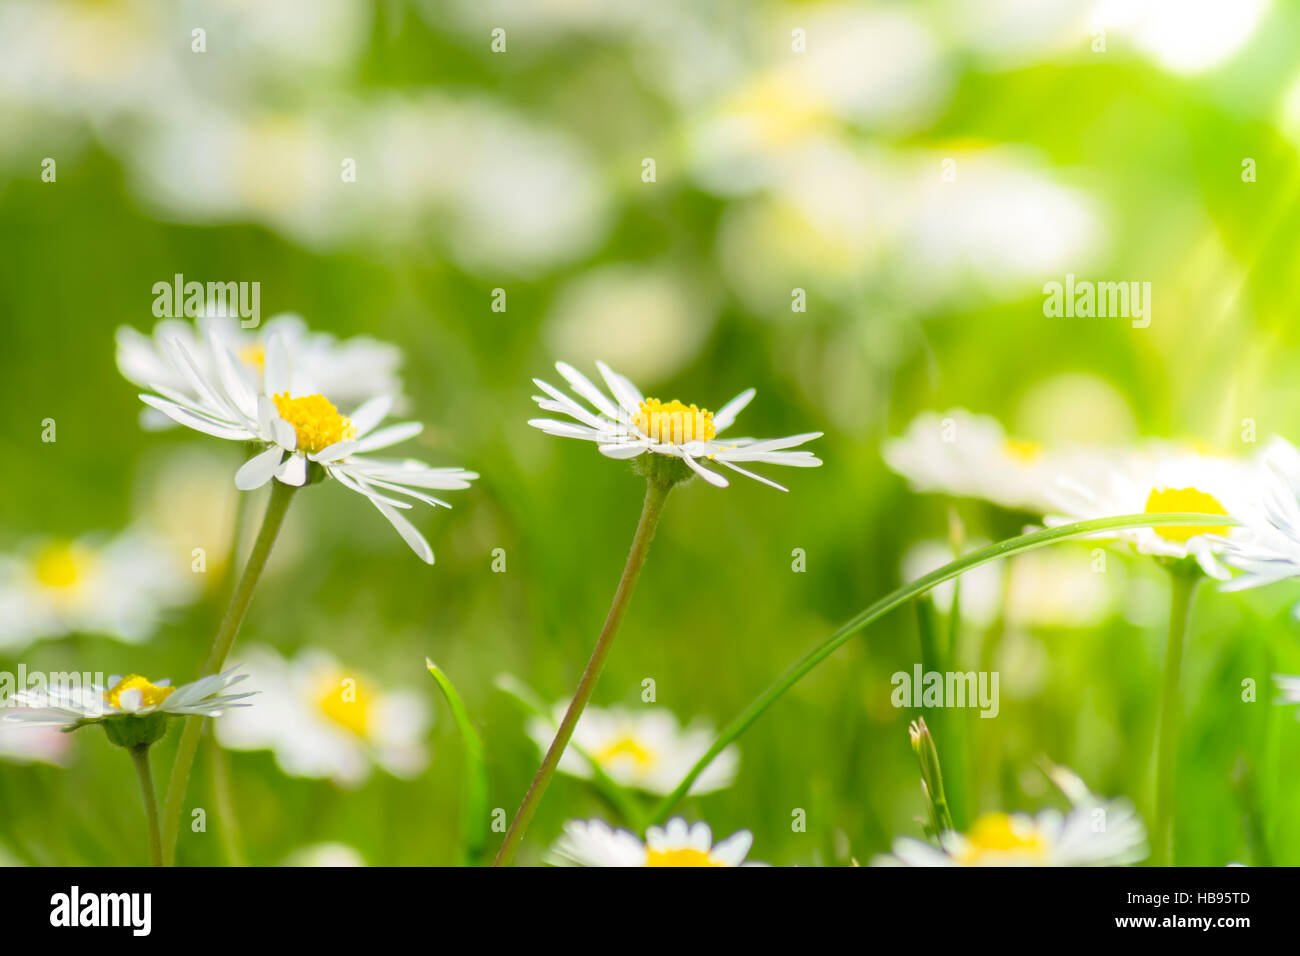 Daisies meadow with sunlight Stock Photo